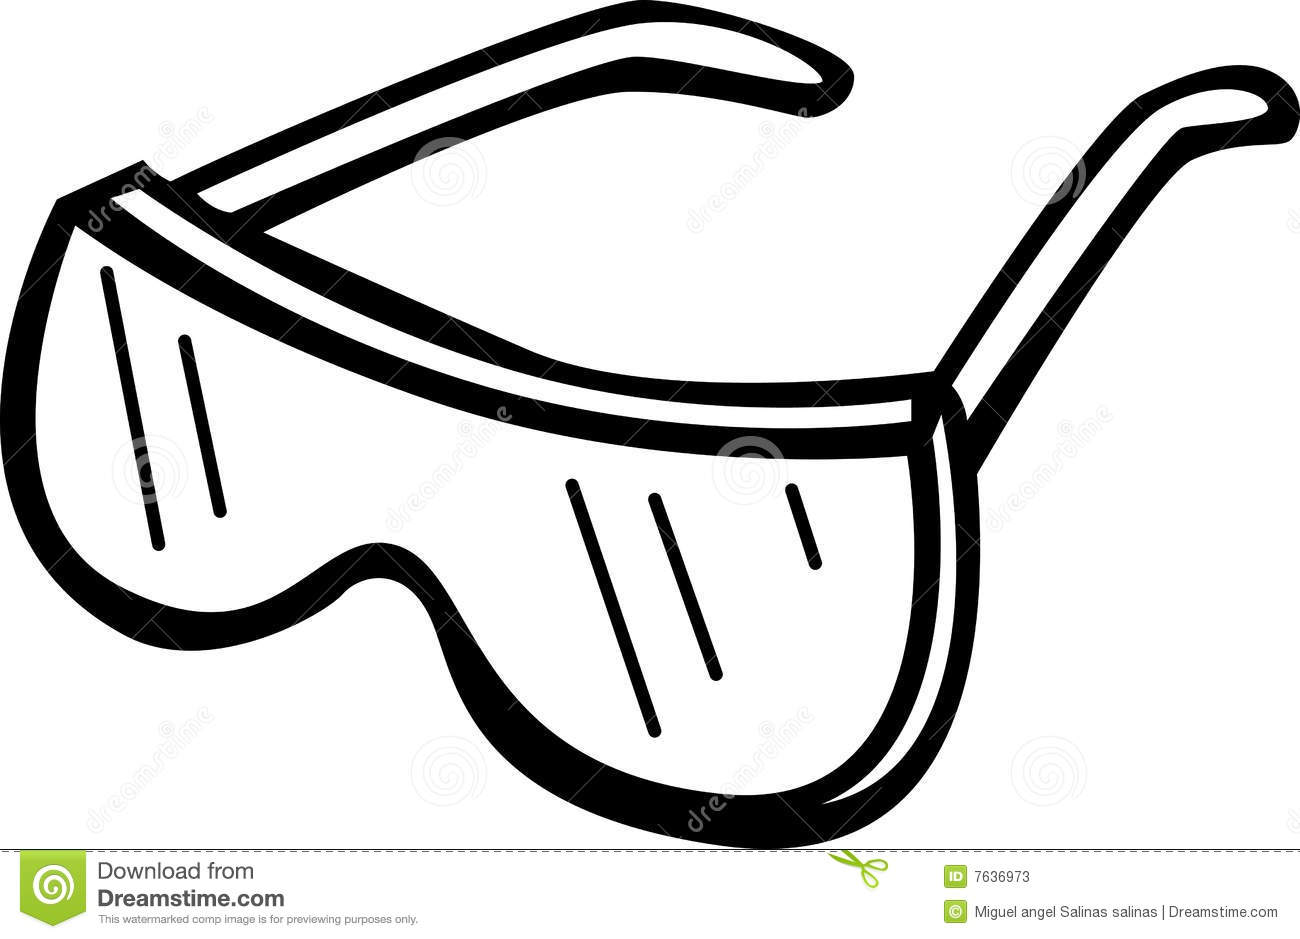 Safety goggles vector illustration Stock Photos